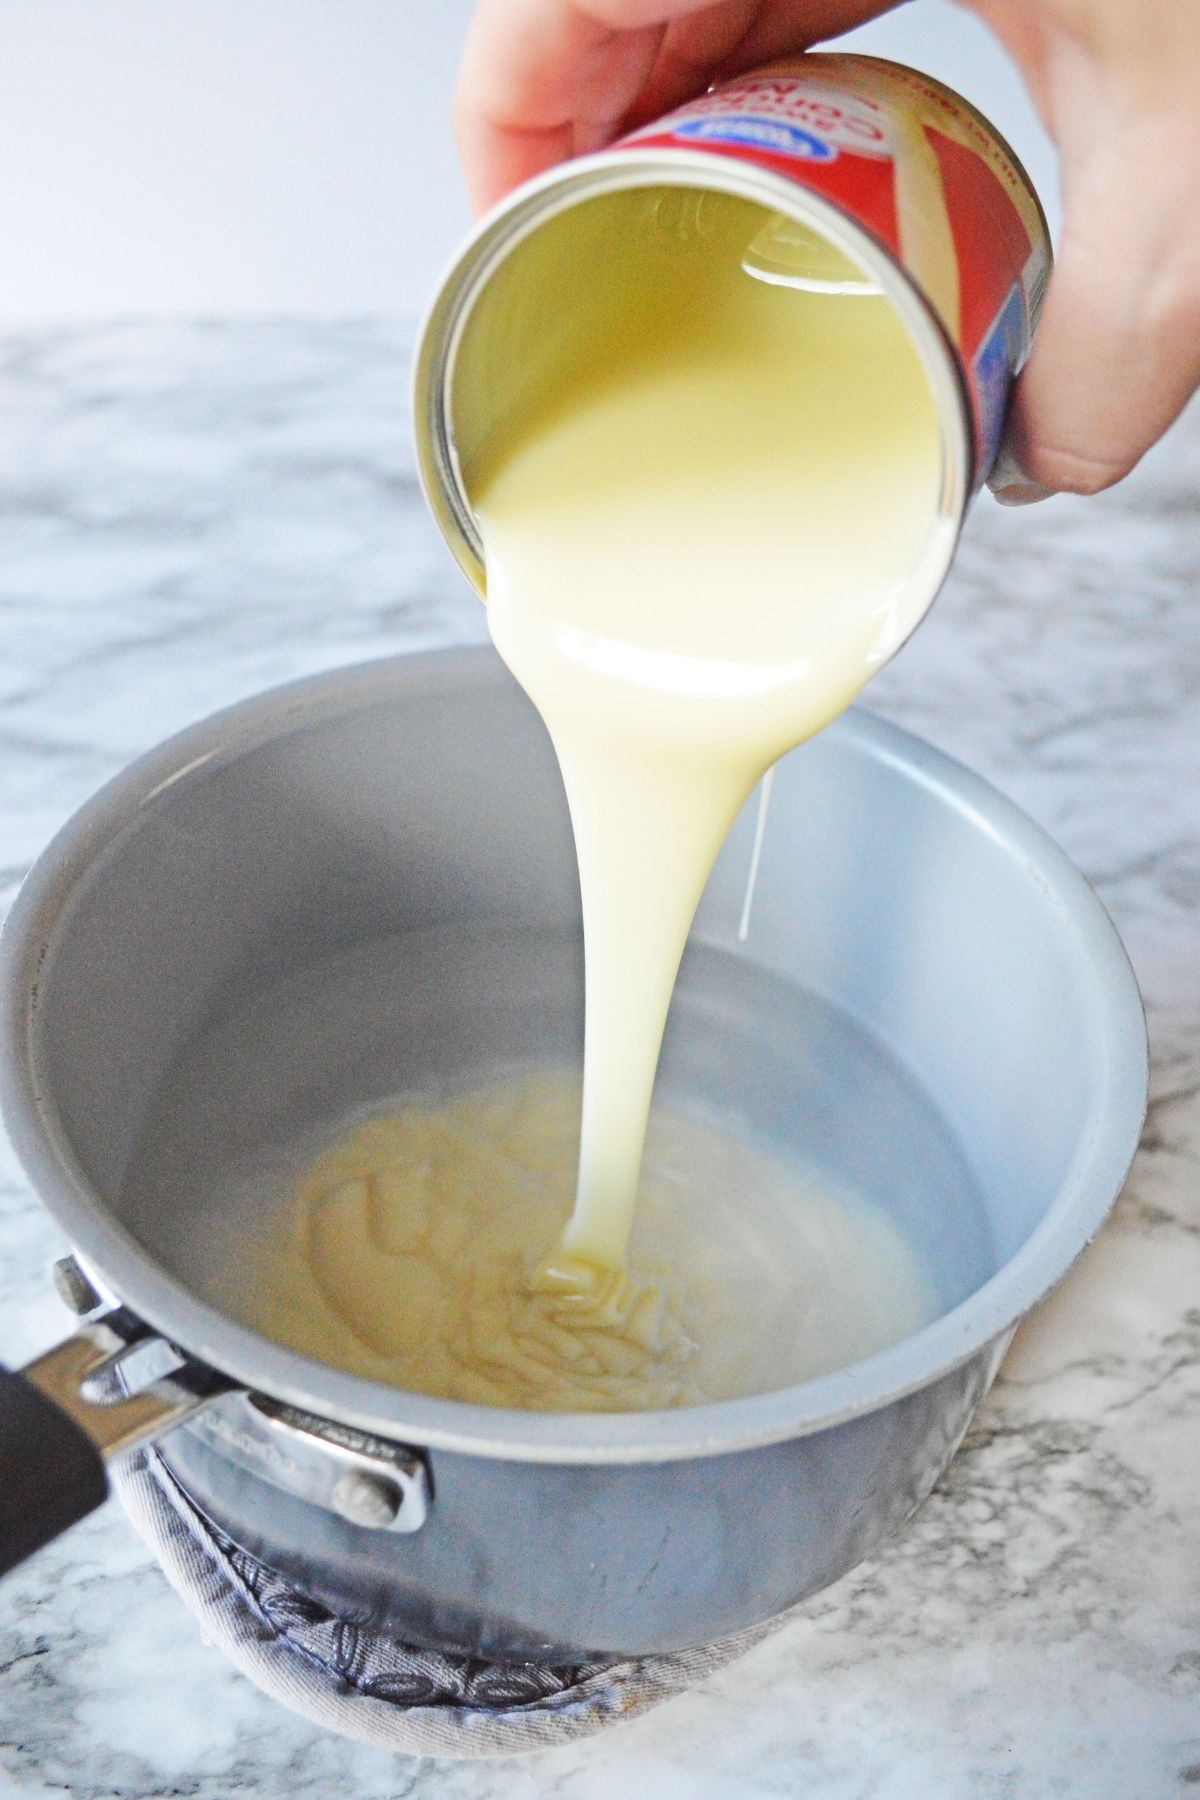 pouring can of condensed milk into sauce pan